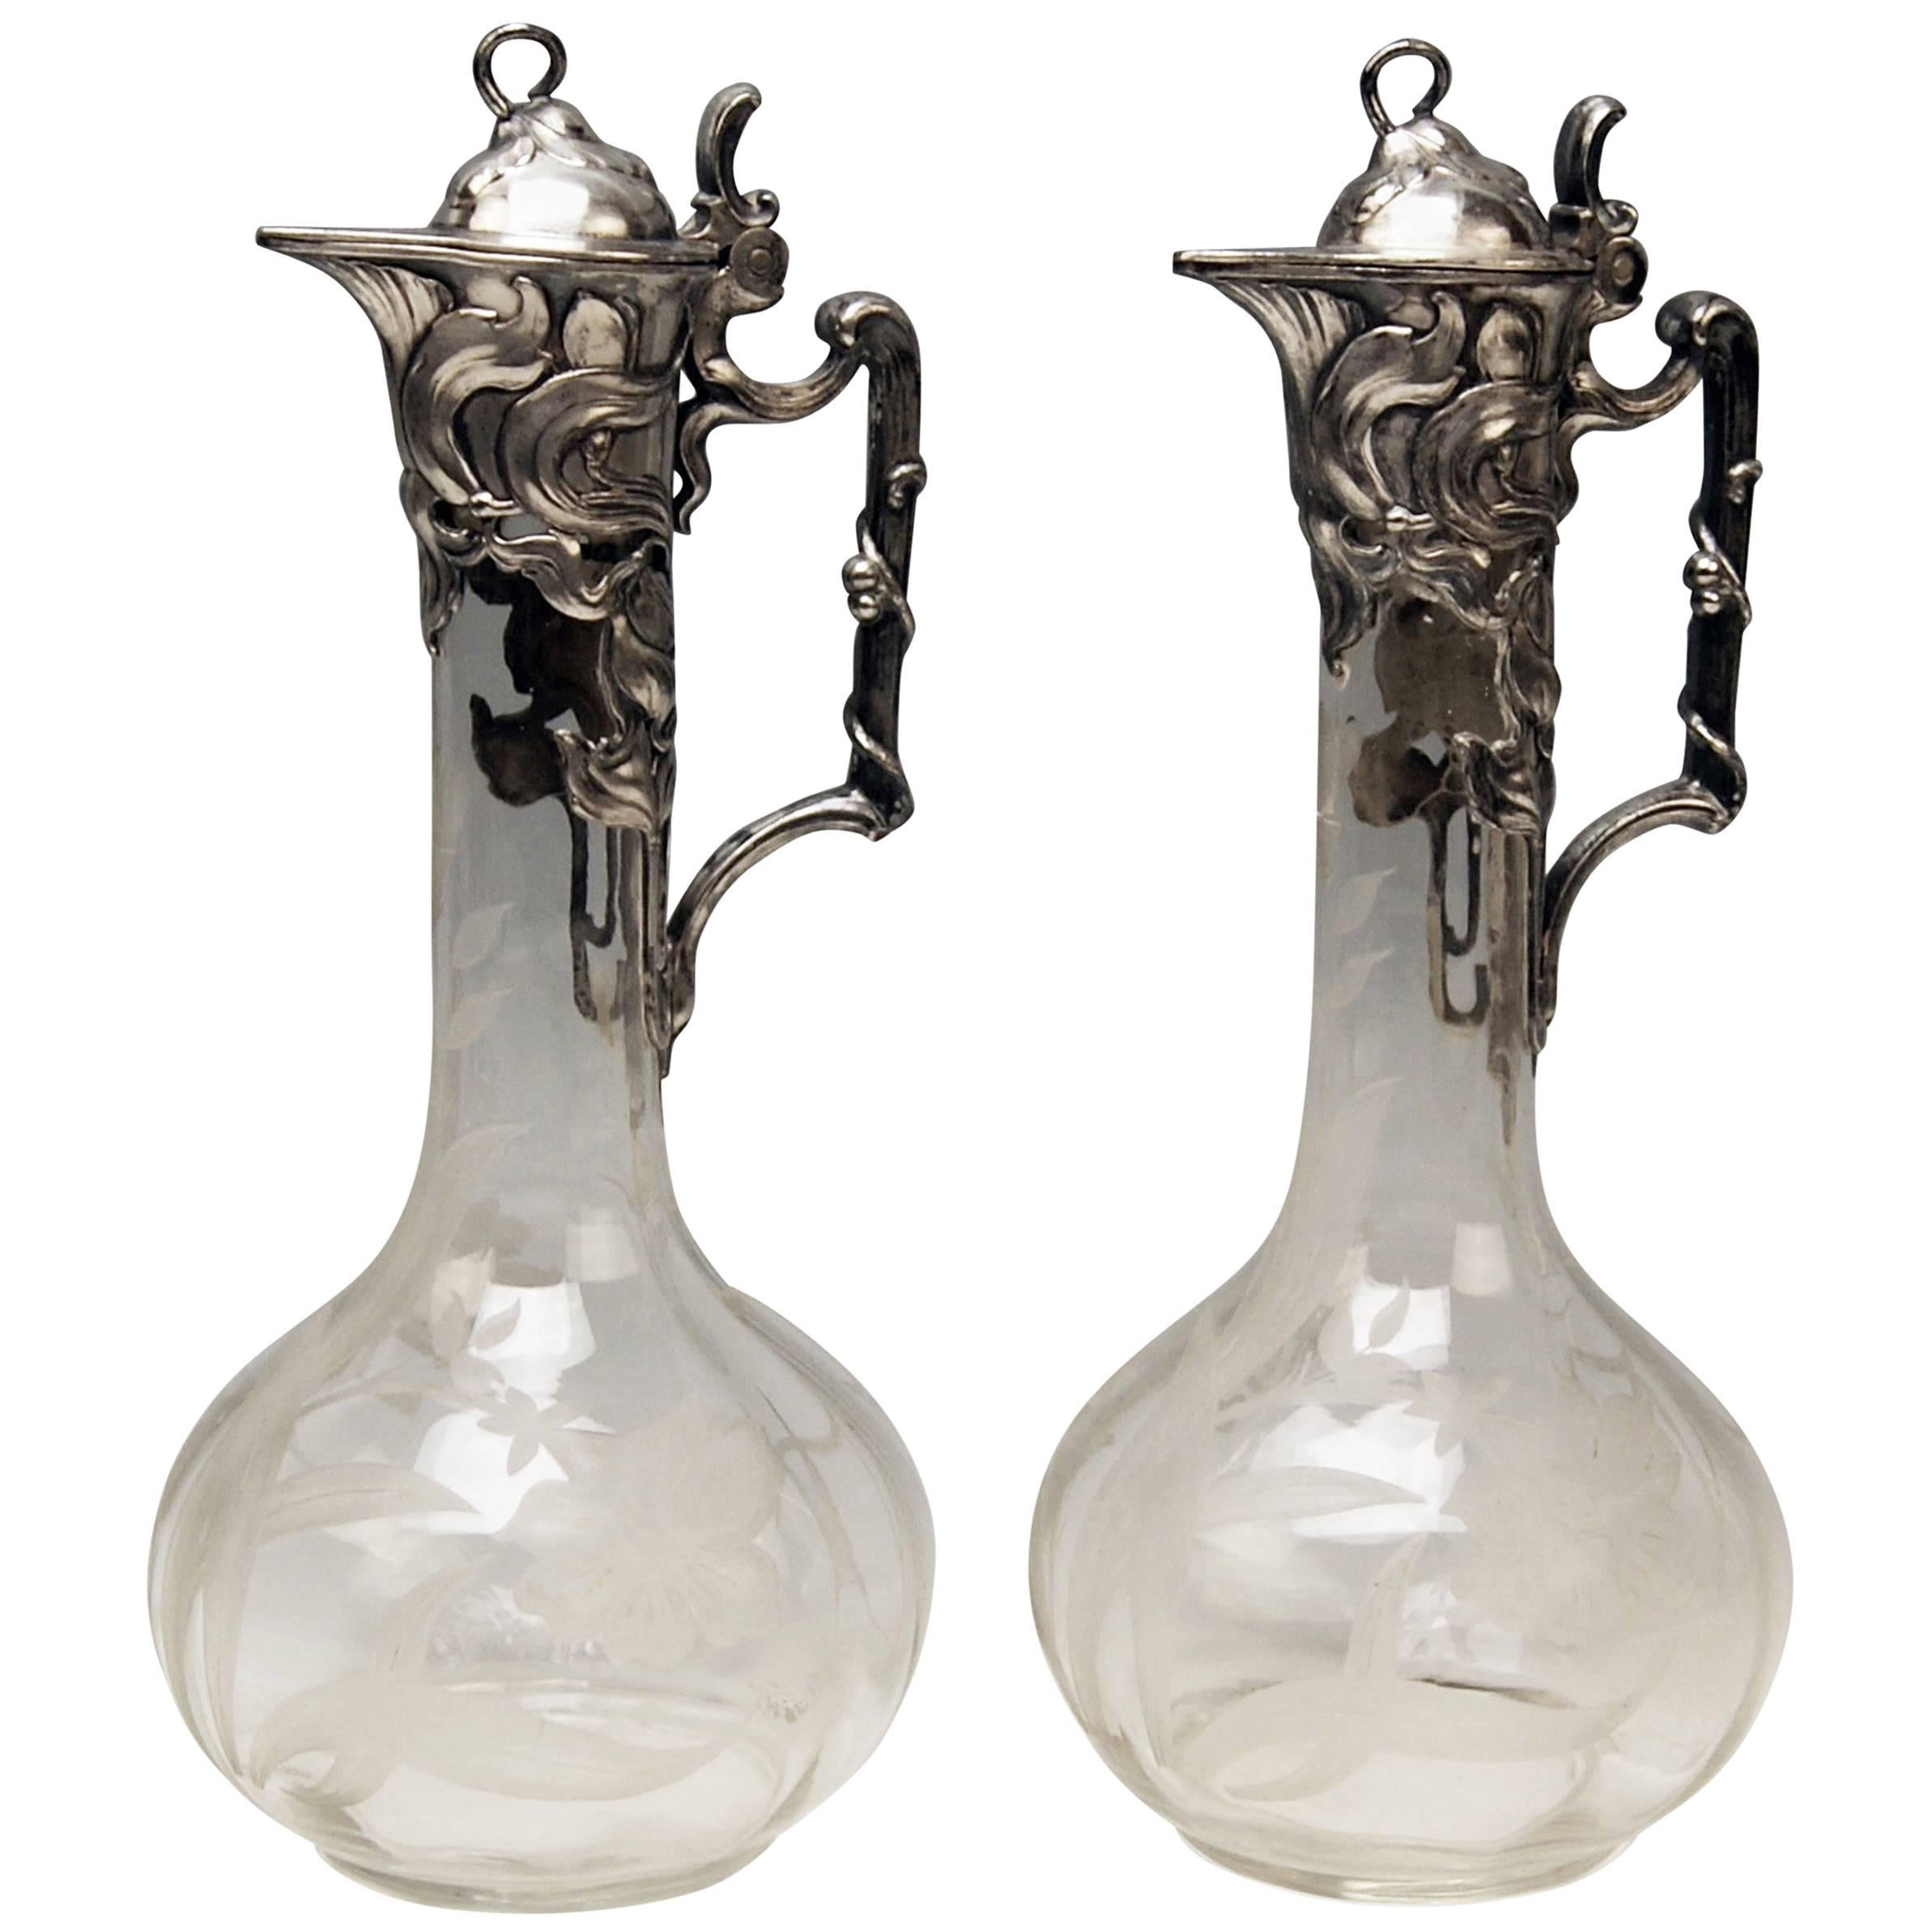 WMF Pair of Claret Water Jugs Silver Plated Art Nouveau Germany, circa 1905